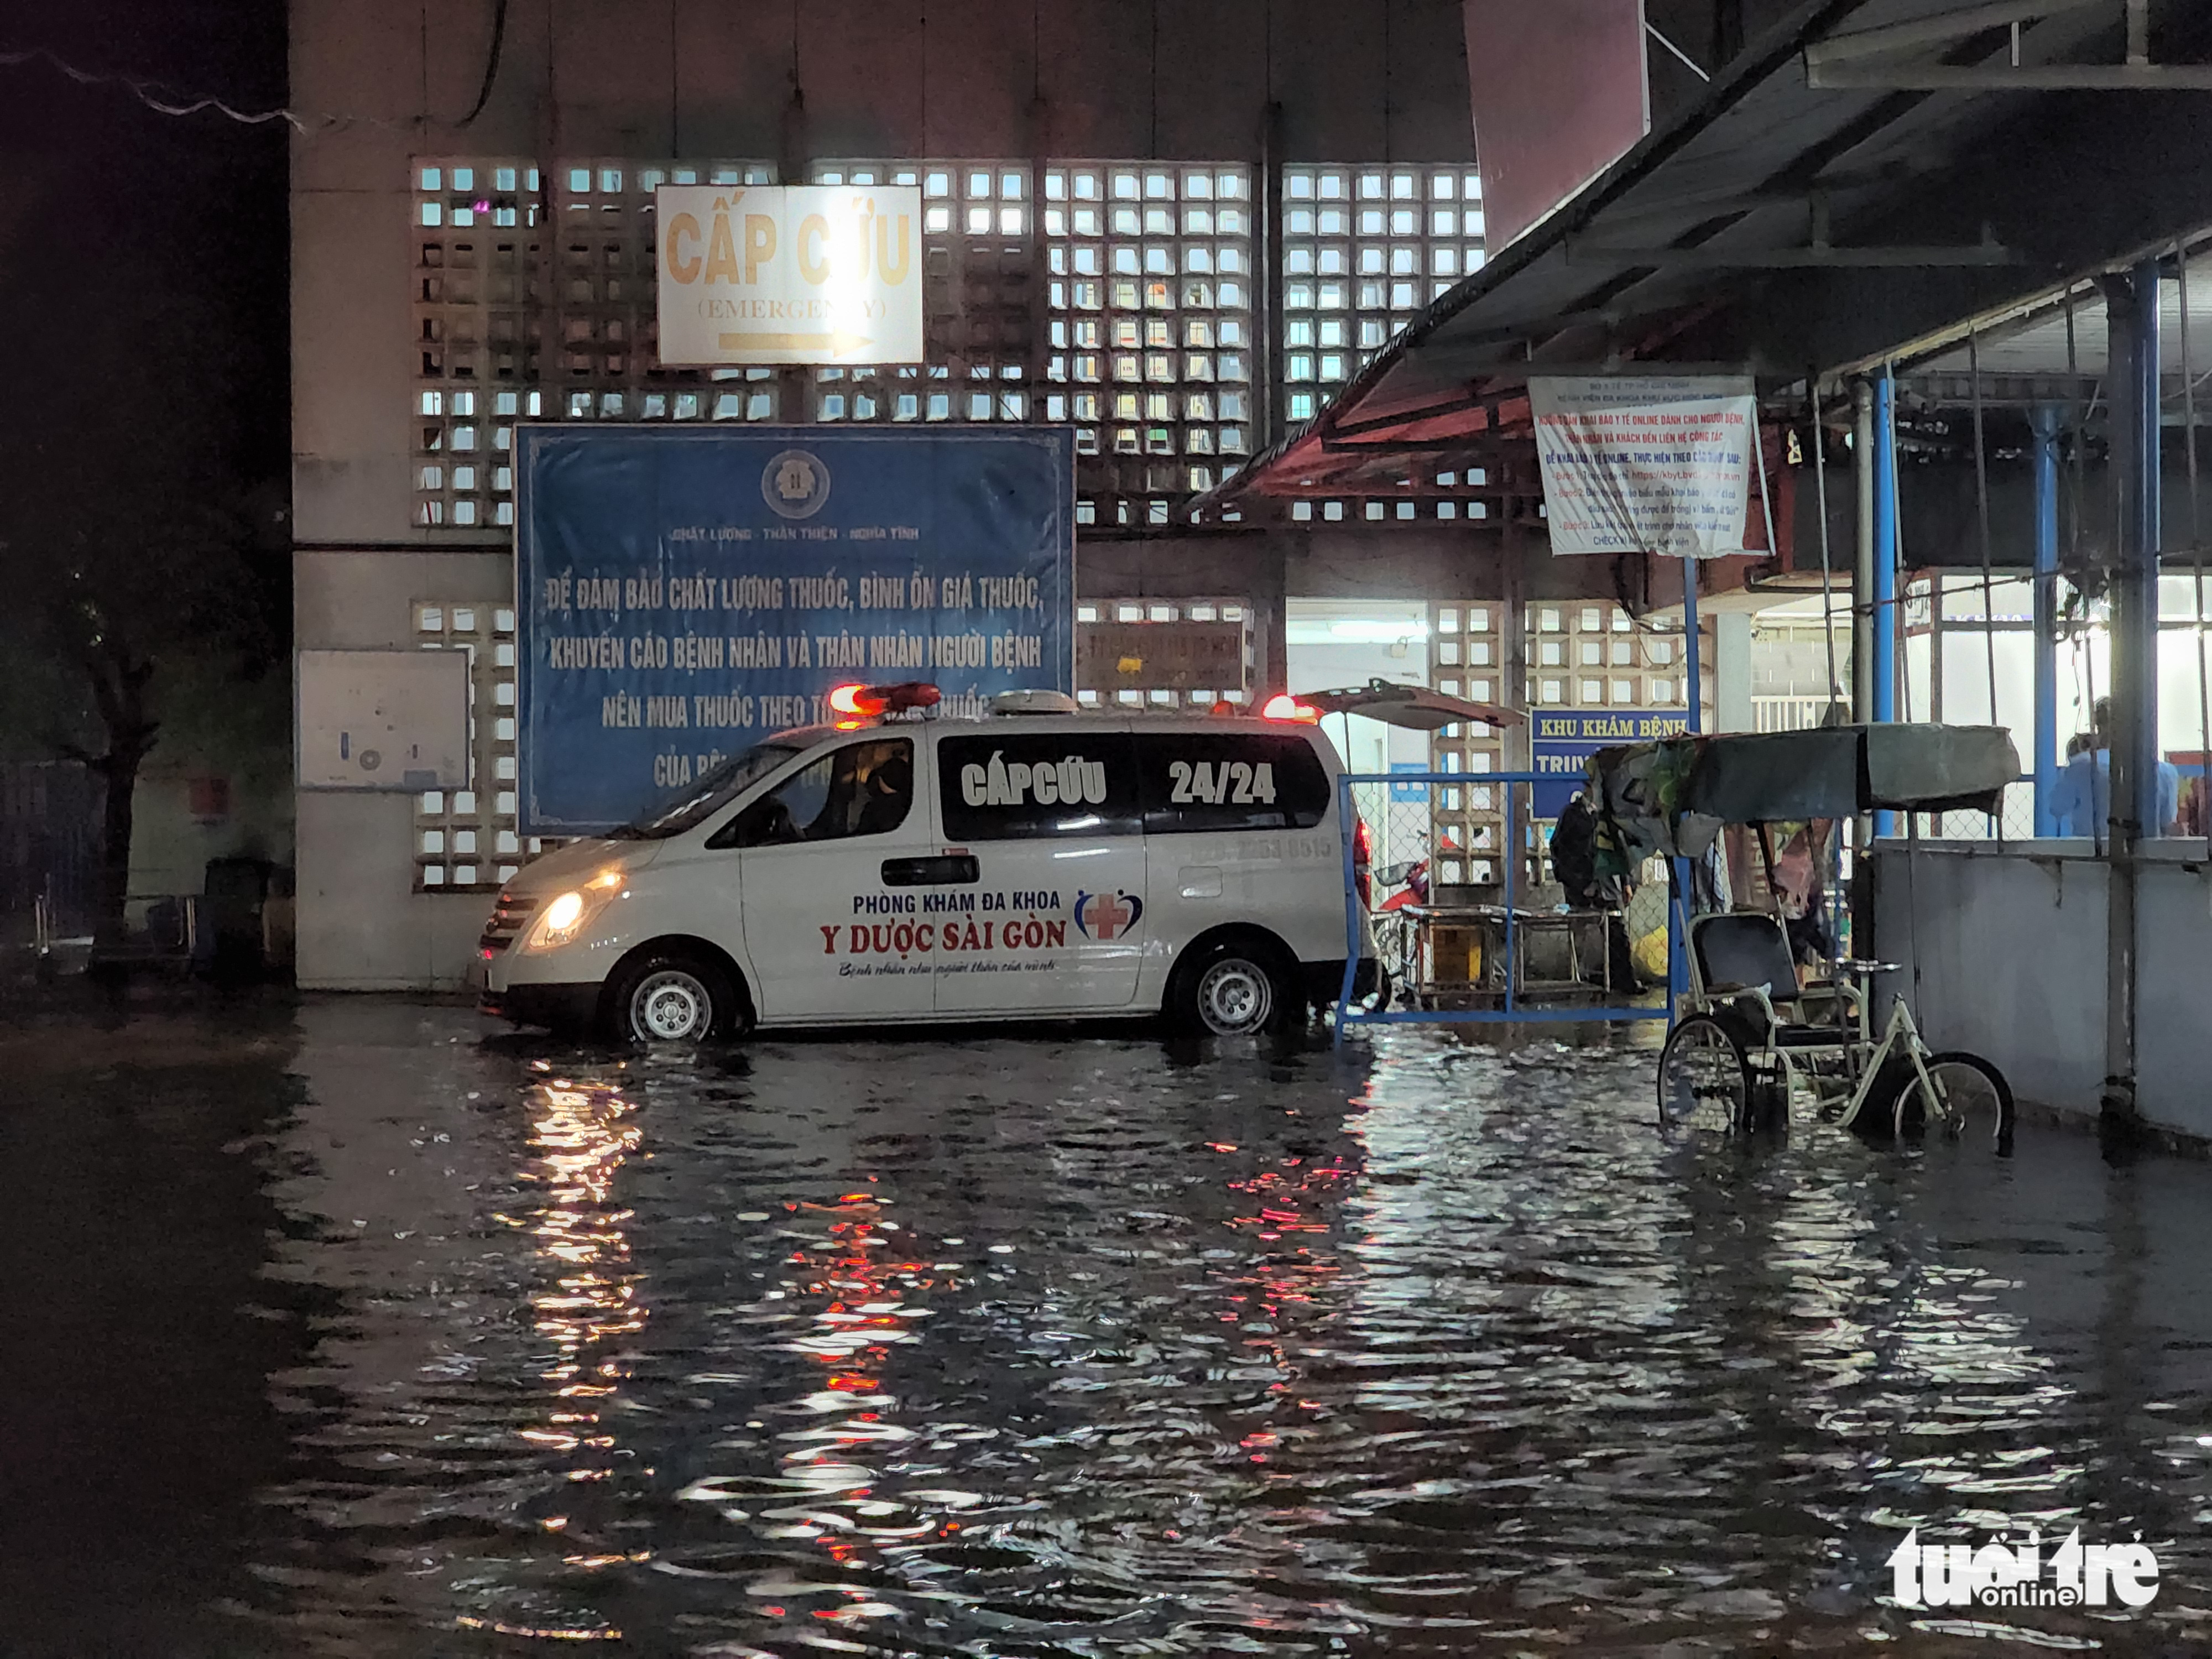 Rainwater floods the entrance to the emergency department of Hoc Mon General Hospital in Hoc Mon District, Ho Chi Minh City, August 15, 2022. Photo: Ngoc Khai / Tuoi Tre